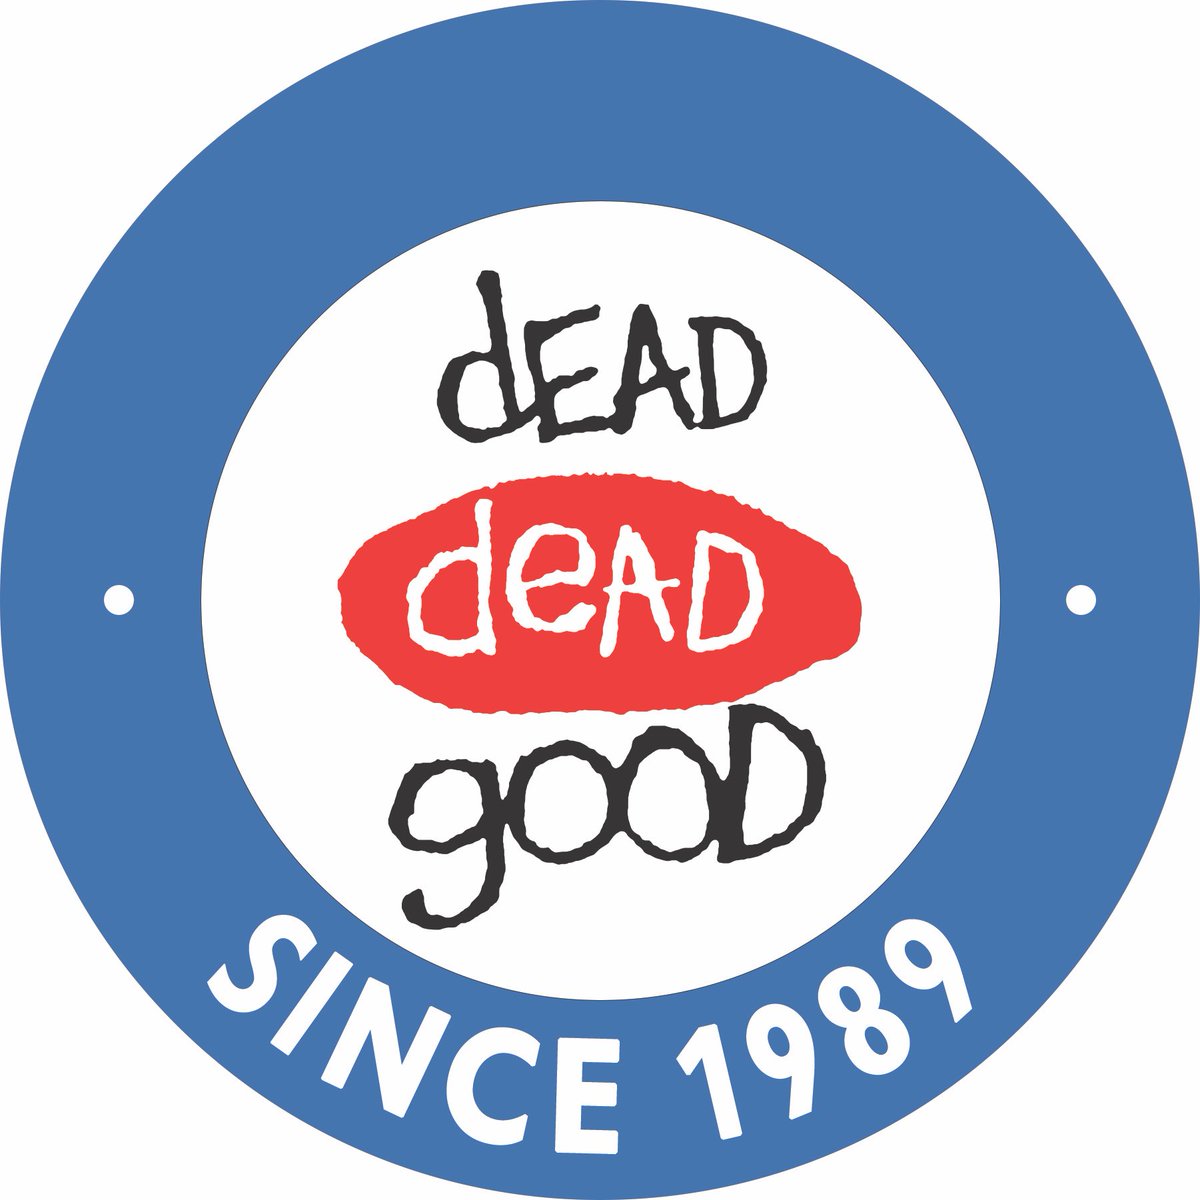 Since 1989 #DDG making an impact around the #Manchester Music Scene from our then  #Northwich HQ #Madchester #AcidHouse #M6Junction19 #IndianRope #Good1 #TransworldRecords @MENnewsdesk #DeadDeadGoodRecords @DeadDeadGoodRe1 @Dead_Dead_Good_ #Northern #Since1989 #Didsbury #TeamDDG